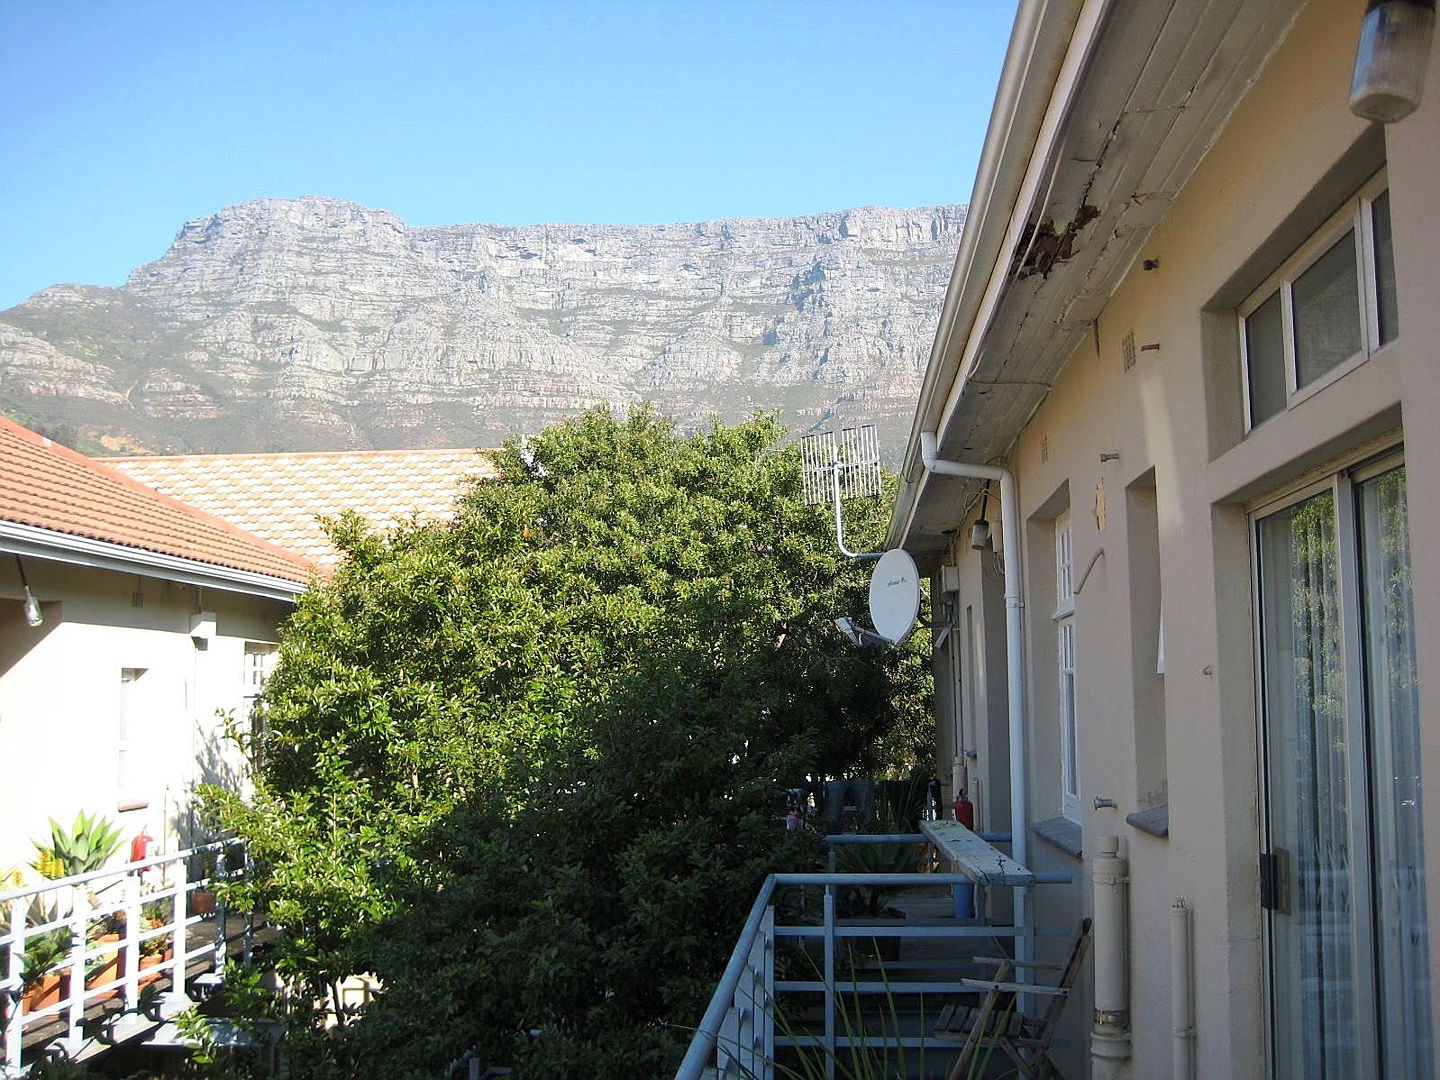  Cape Town
- 1328768_large.jpg